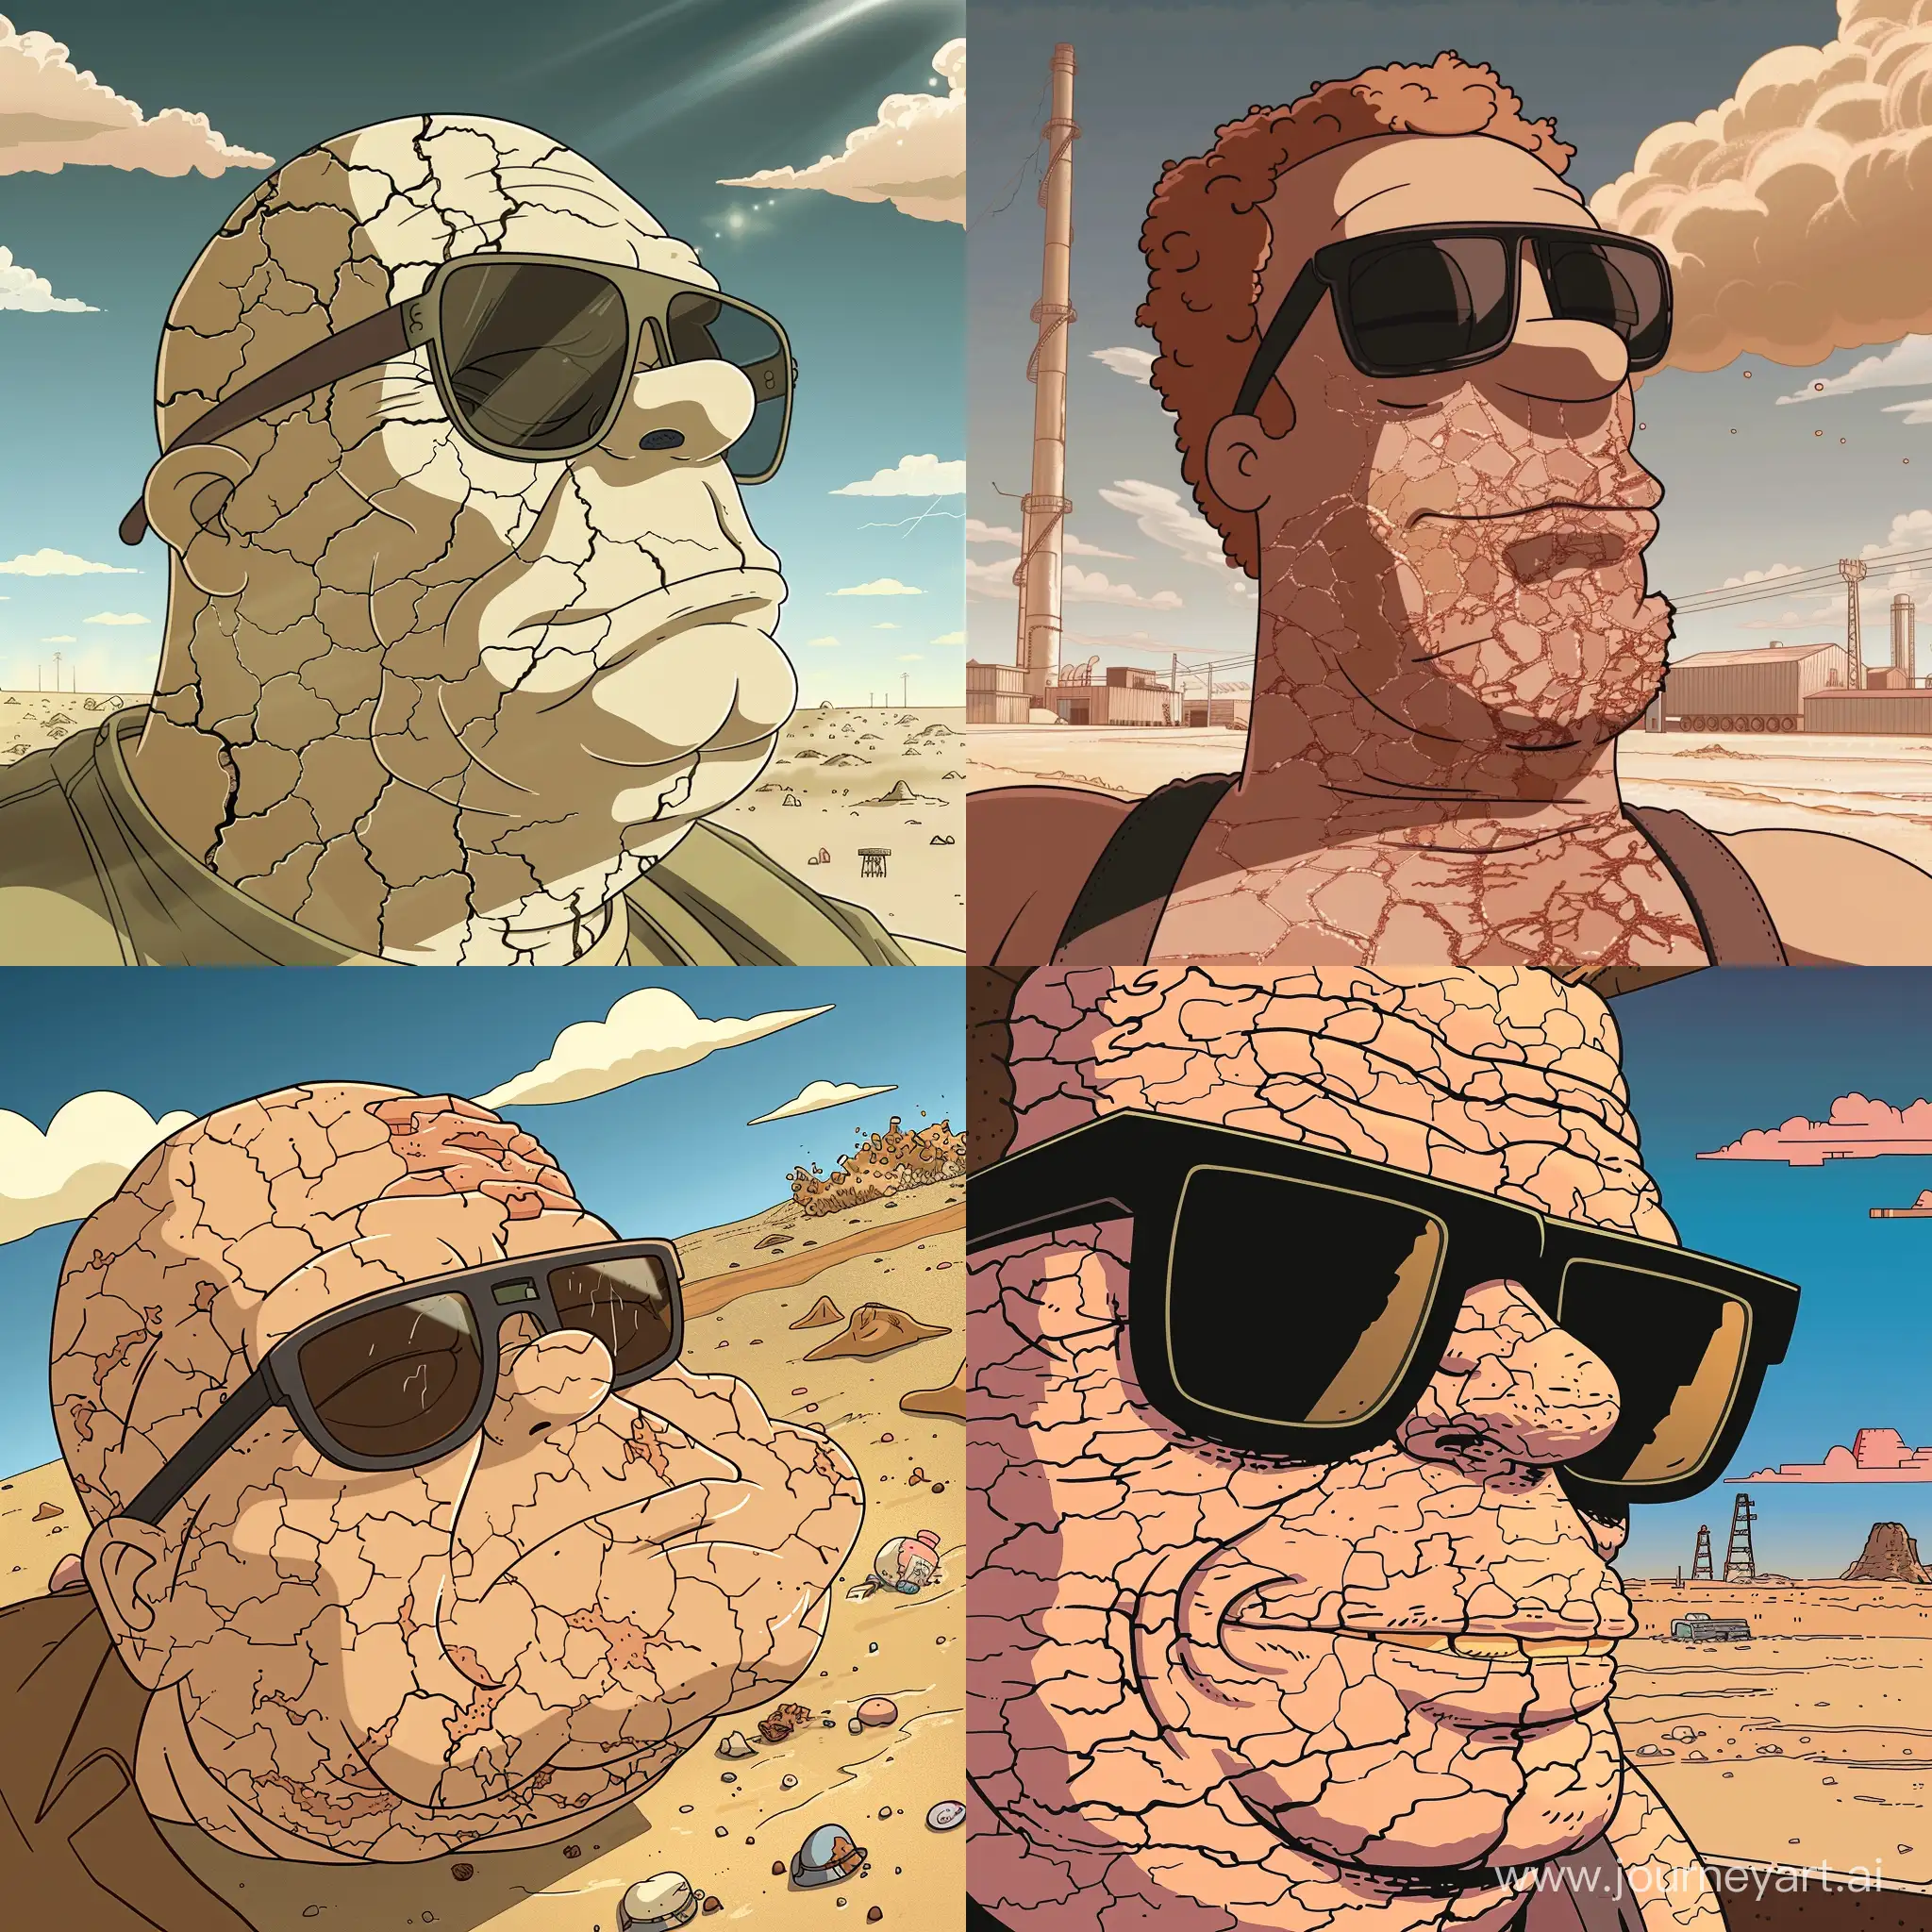 Peter Griffin, wearing sunglasses, is resting at the nuclear waste disposal site, his skin begins to gradually peel off starting from his chin